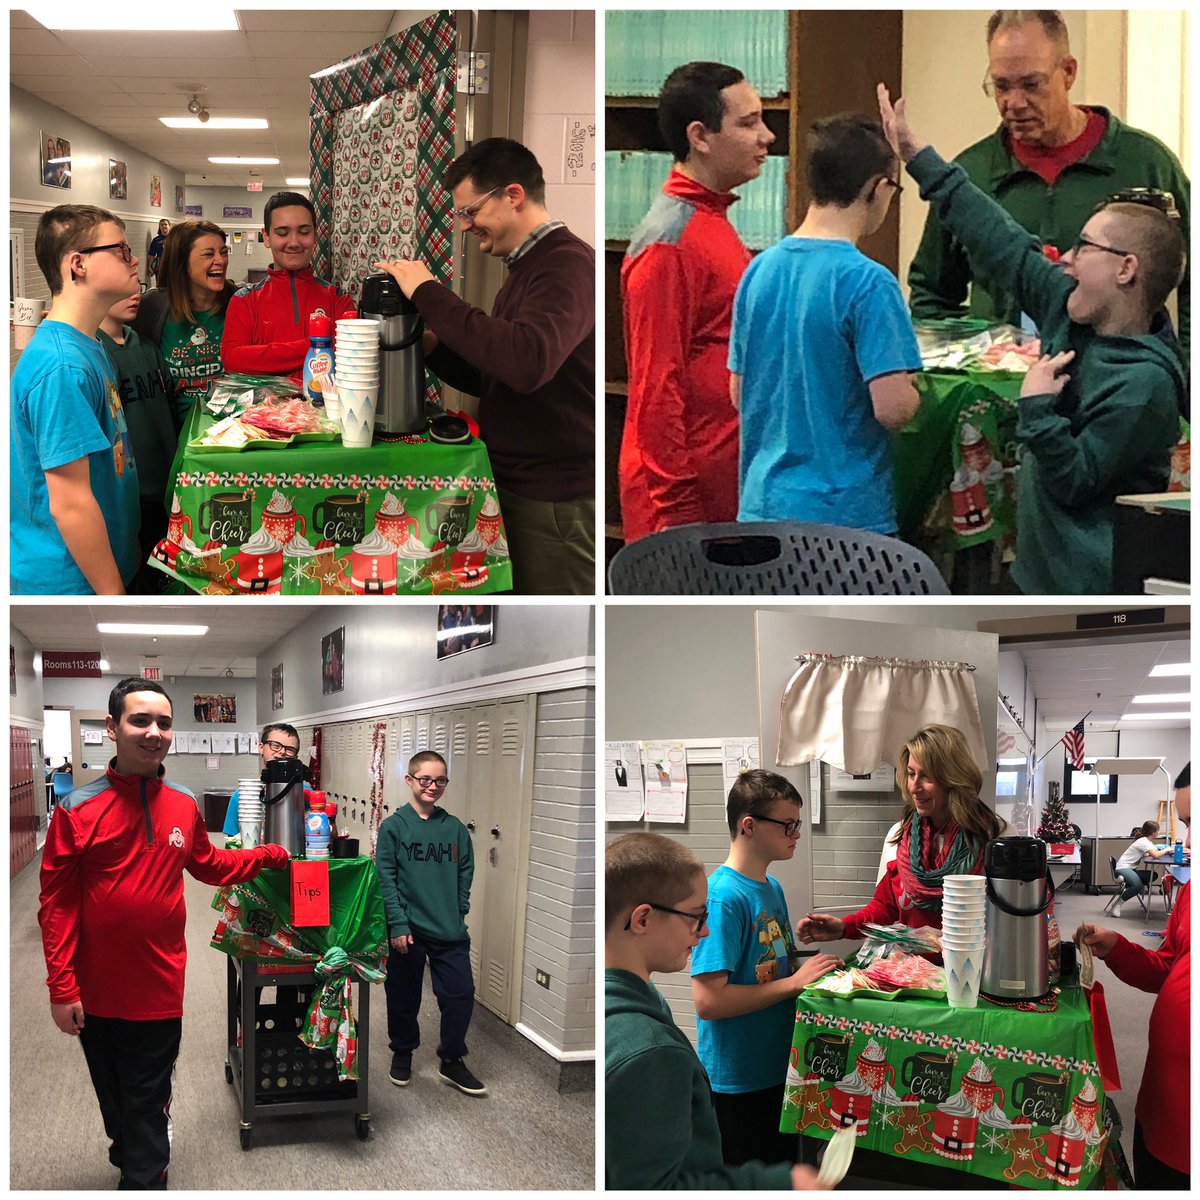 Today we worked on our employability and social skills by spreading holiday cheer with those 190 cookies, coffee and candy canes to our MMS Staff! #ThisIsOurHouse